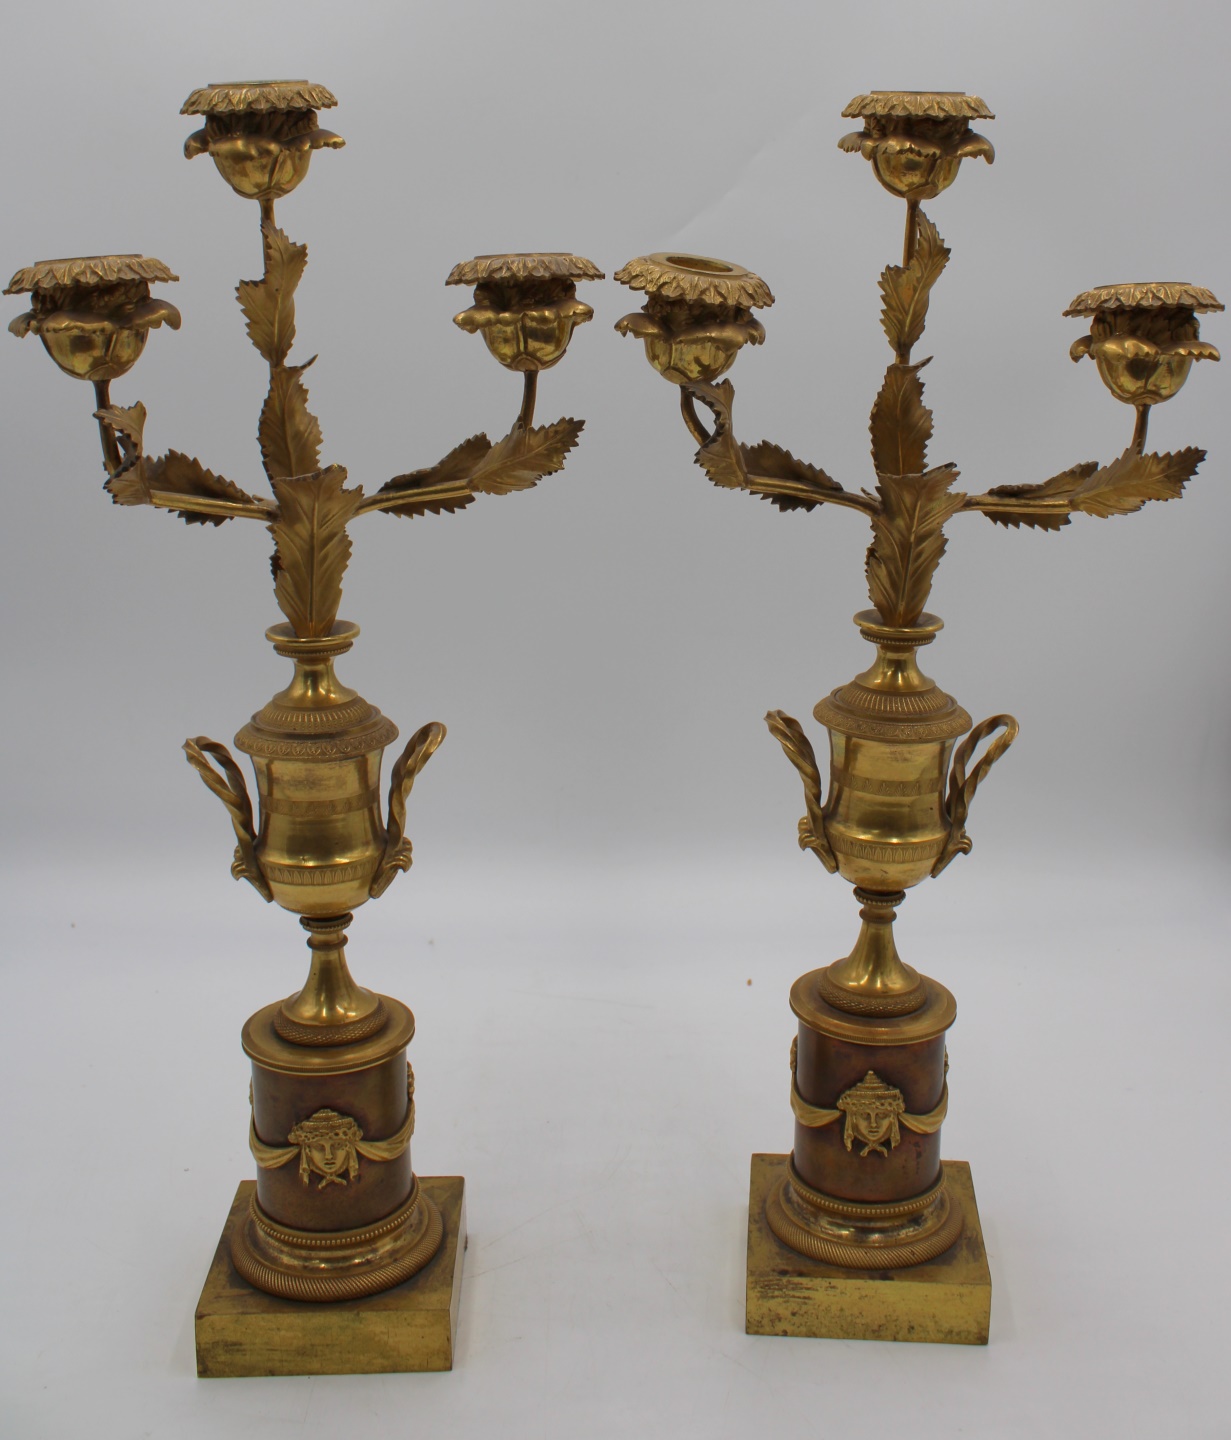 PAIR OF EMPIRE GILT & PATINATED